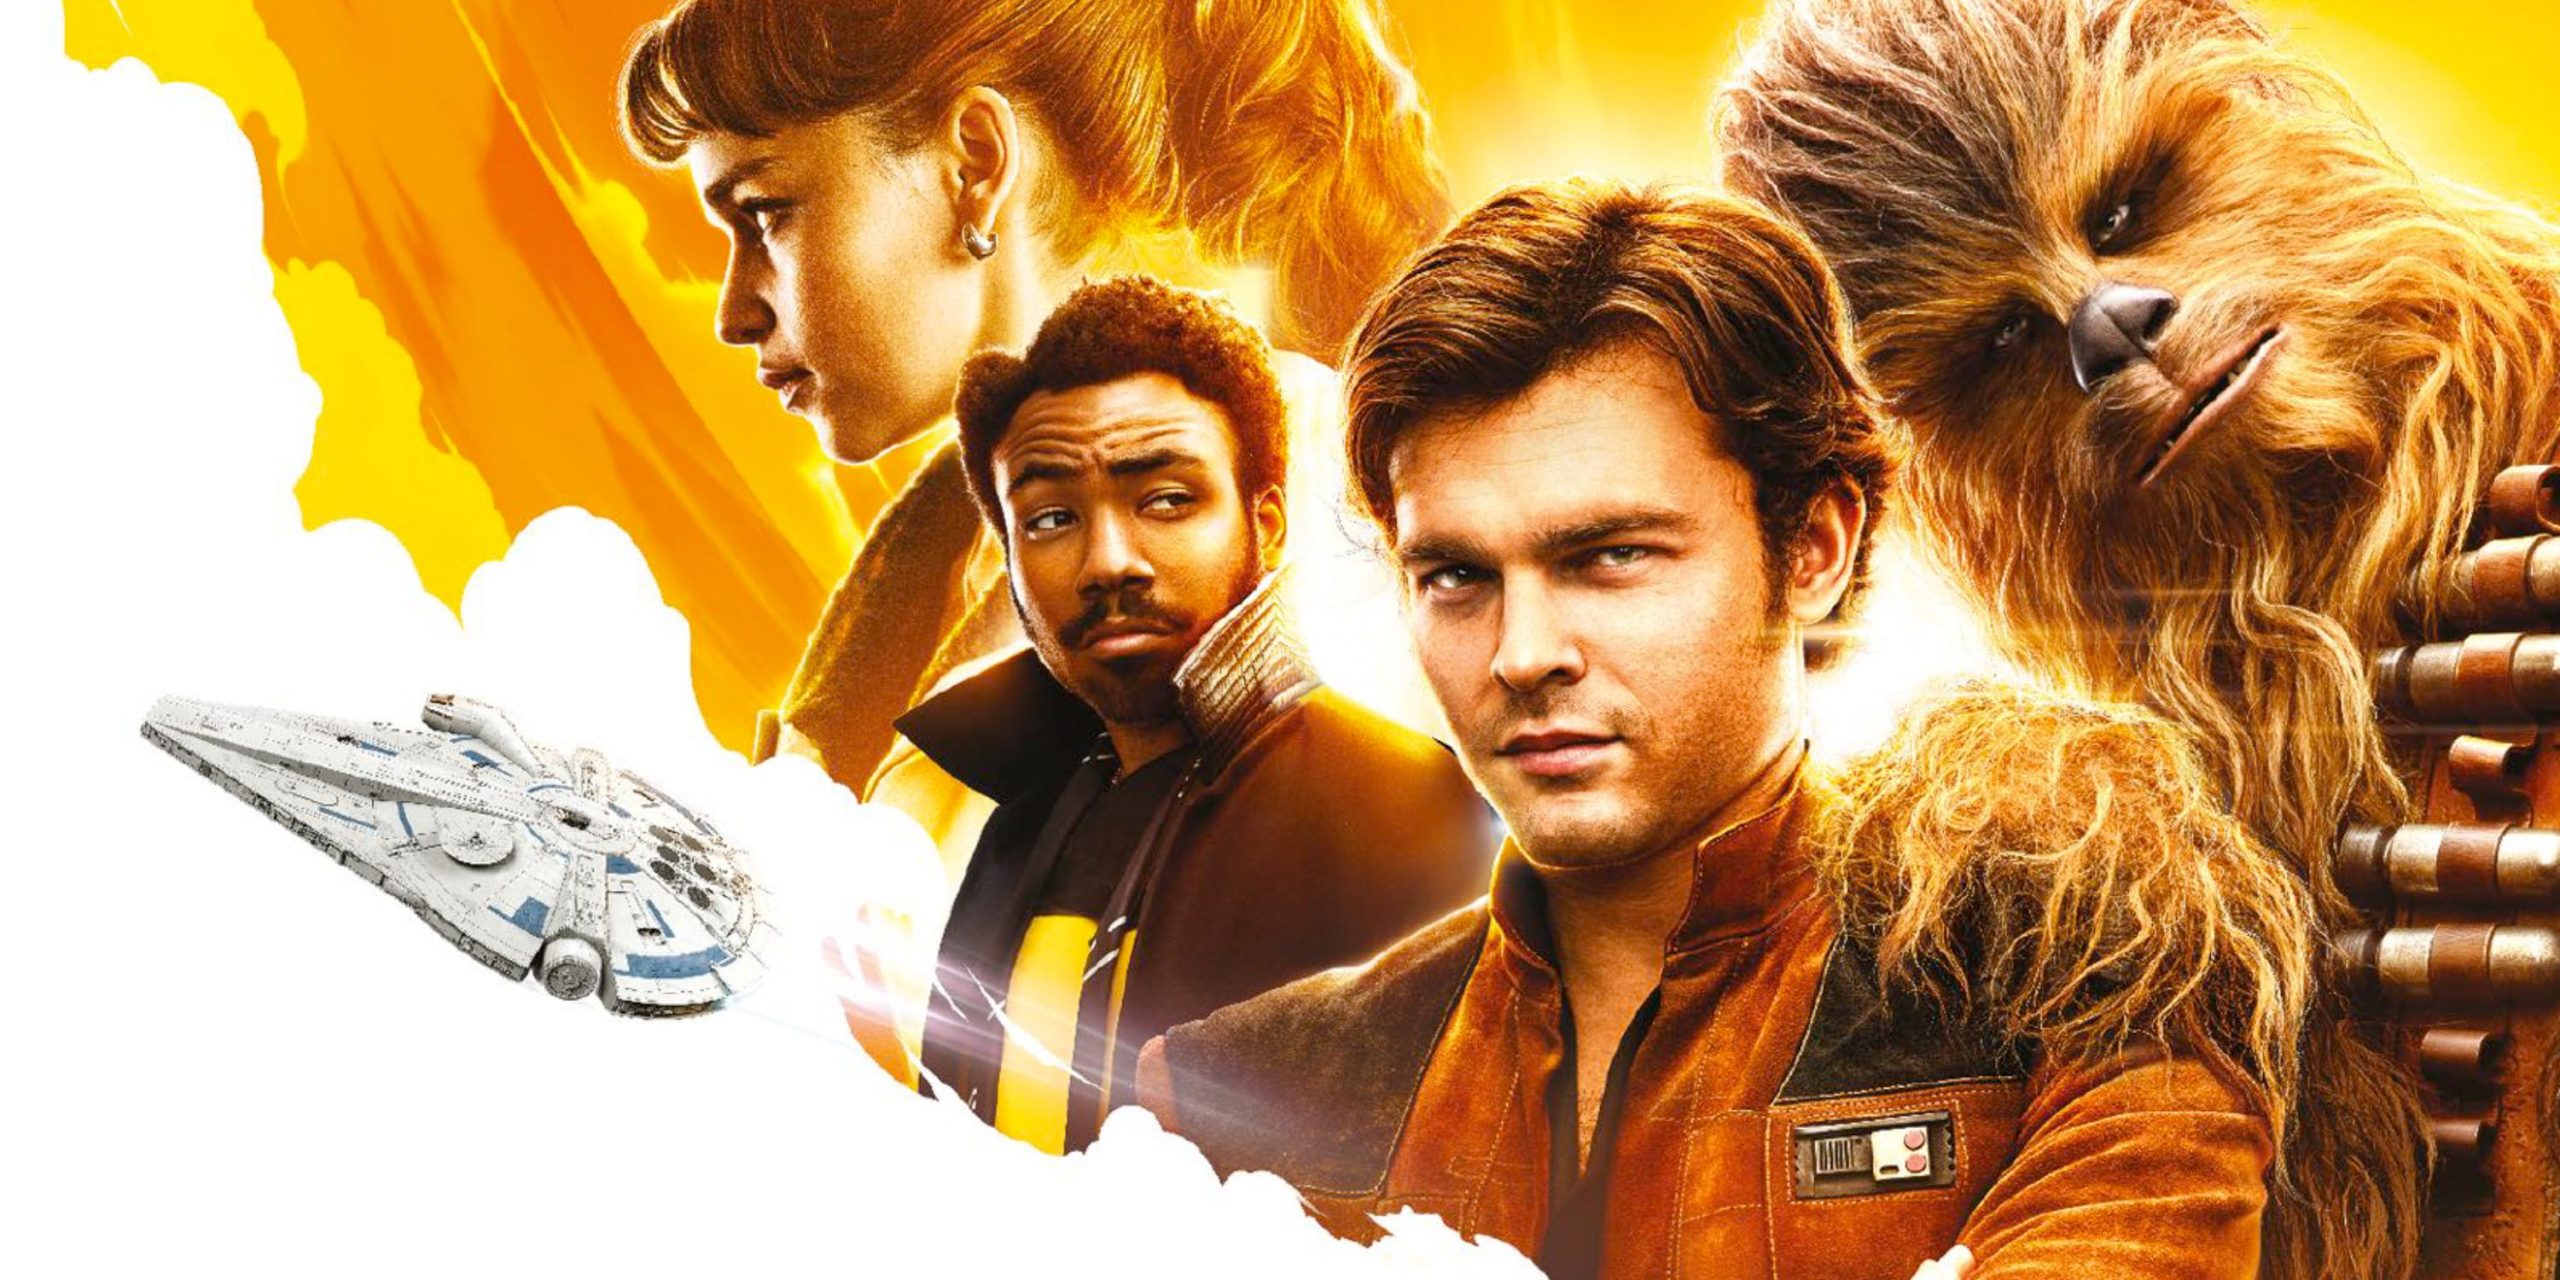 Solo-A-Star-Wars-Story